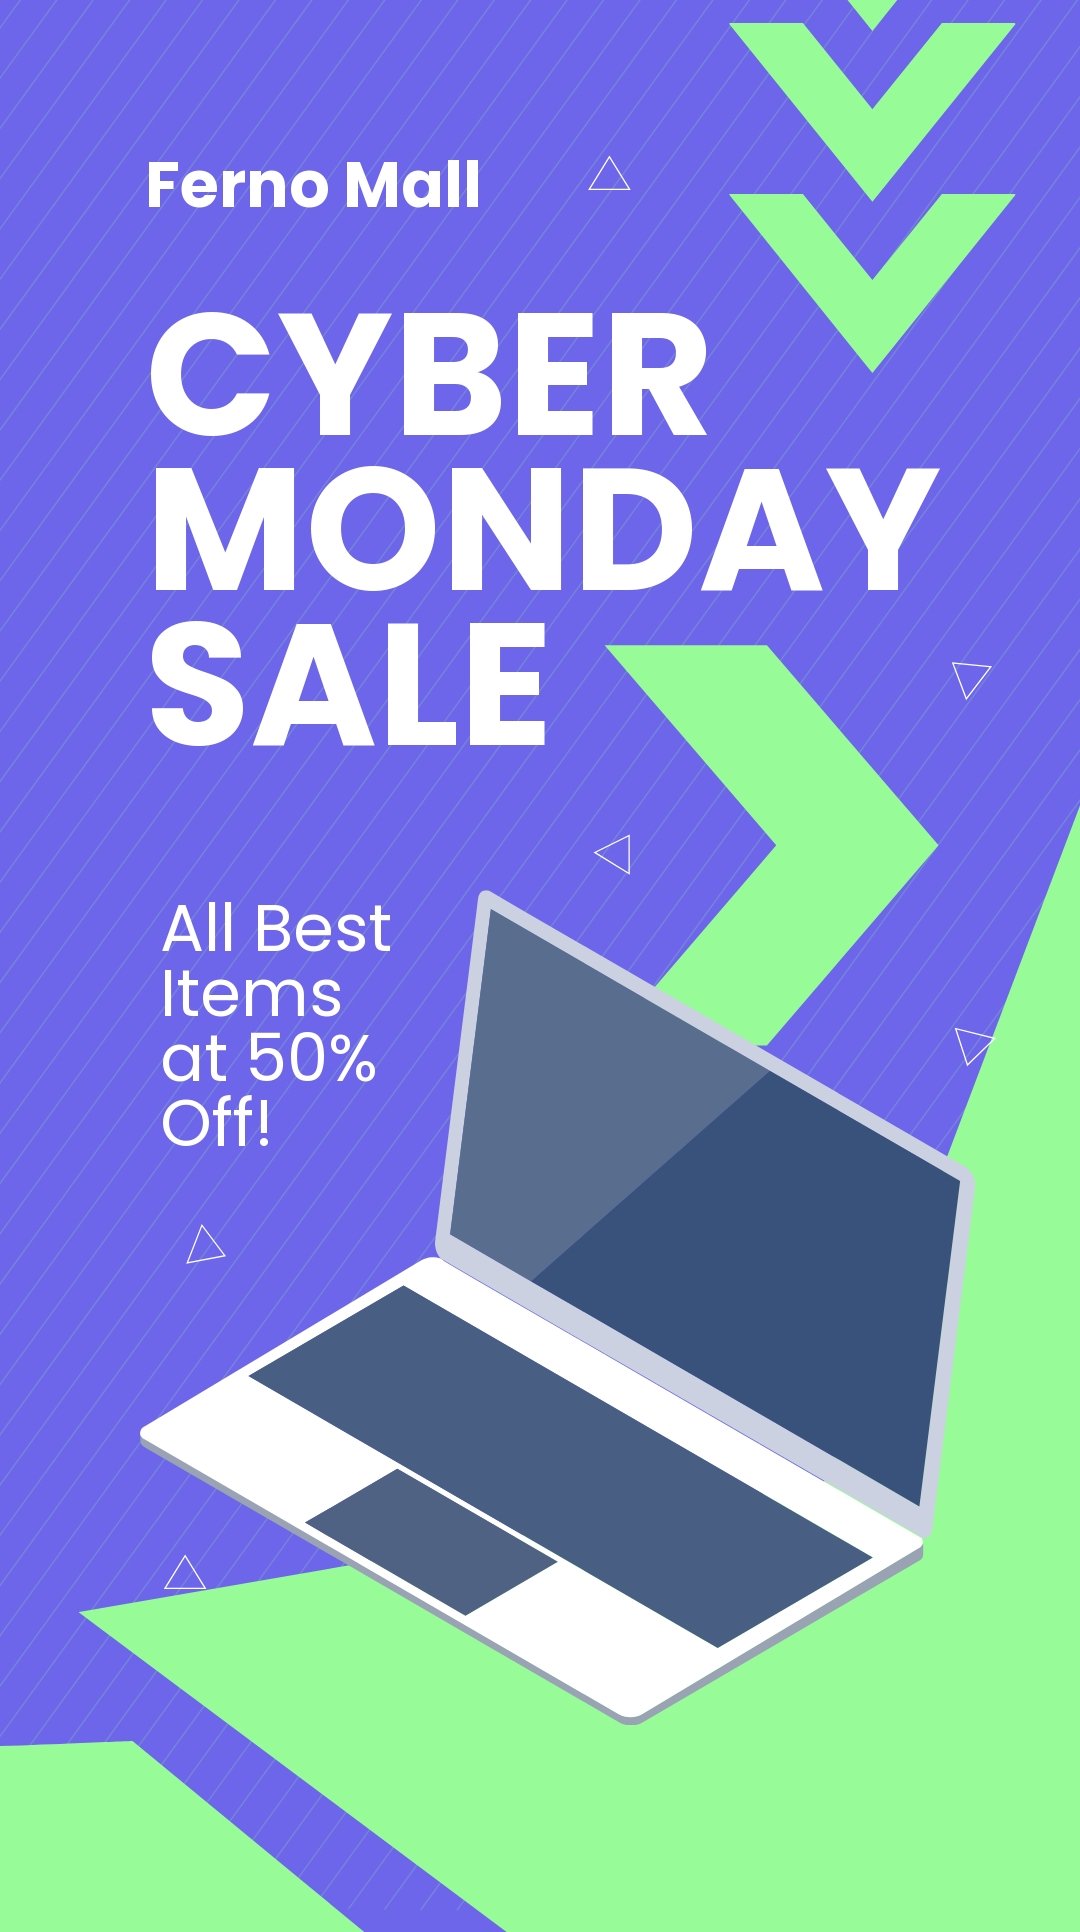 Cyber Monday Sales Event Whatsapp Post Template